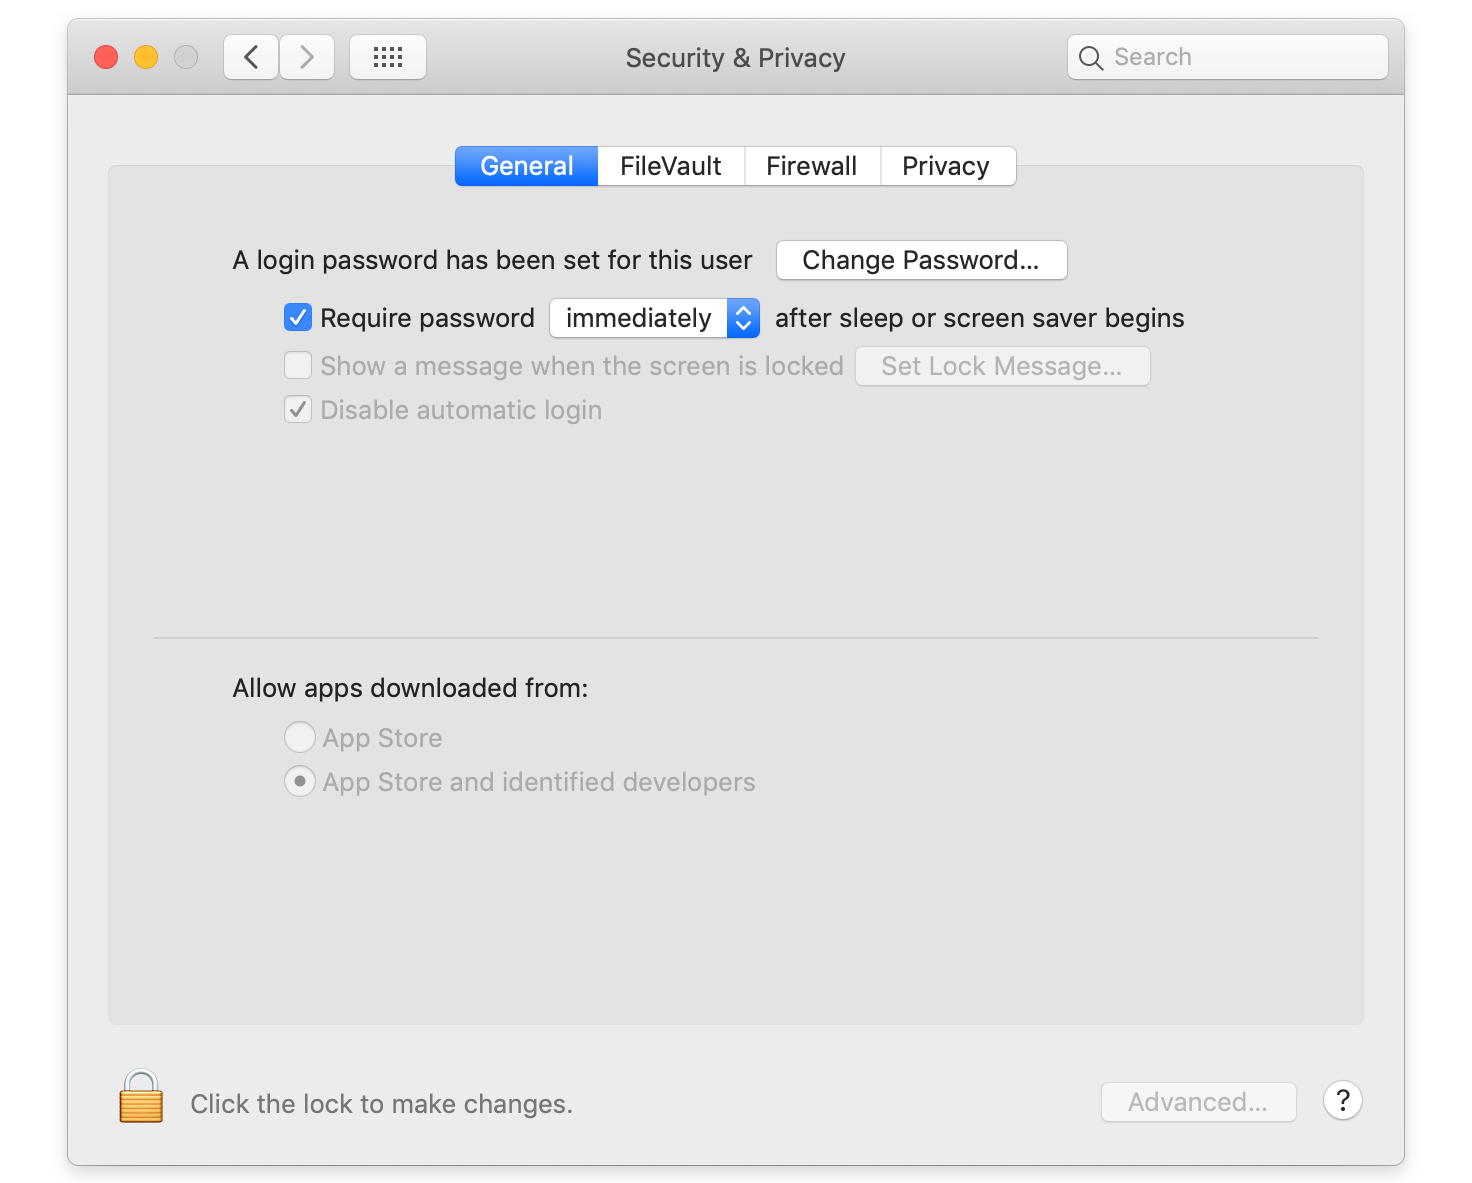 Enable automatic locking and a password time frame on your devices